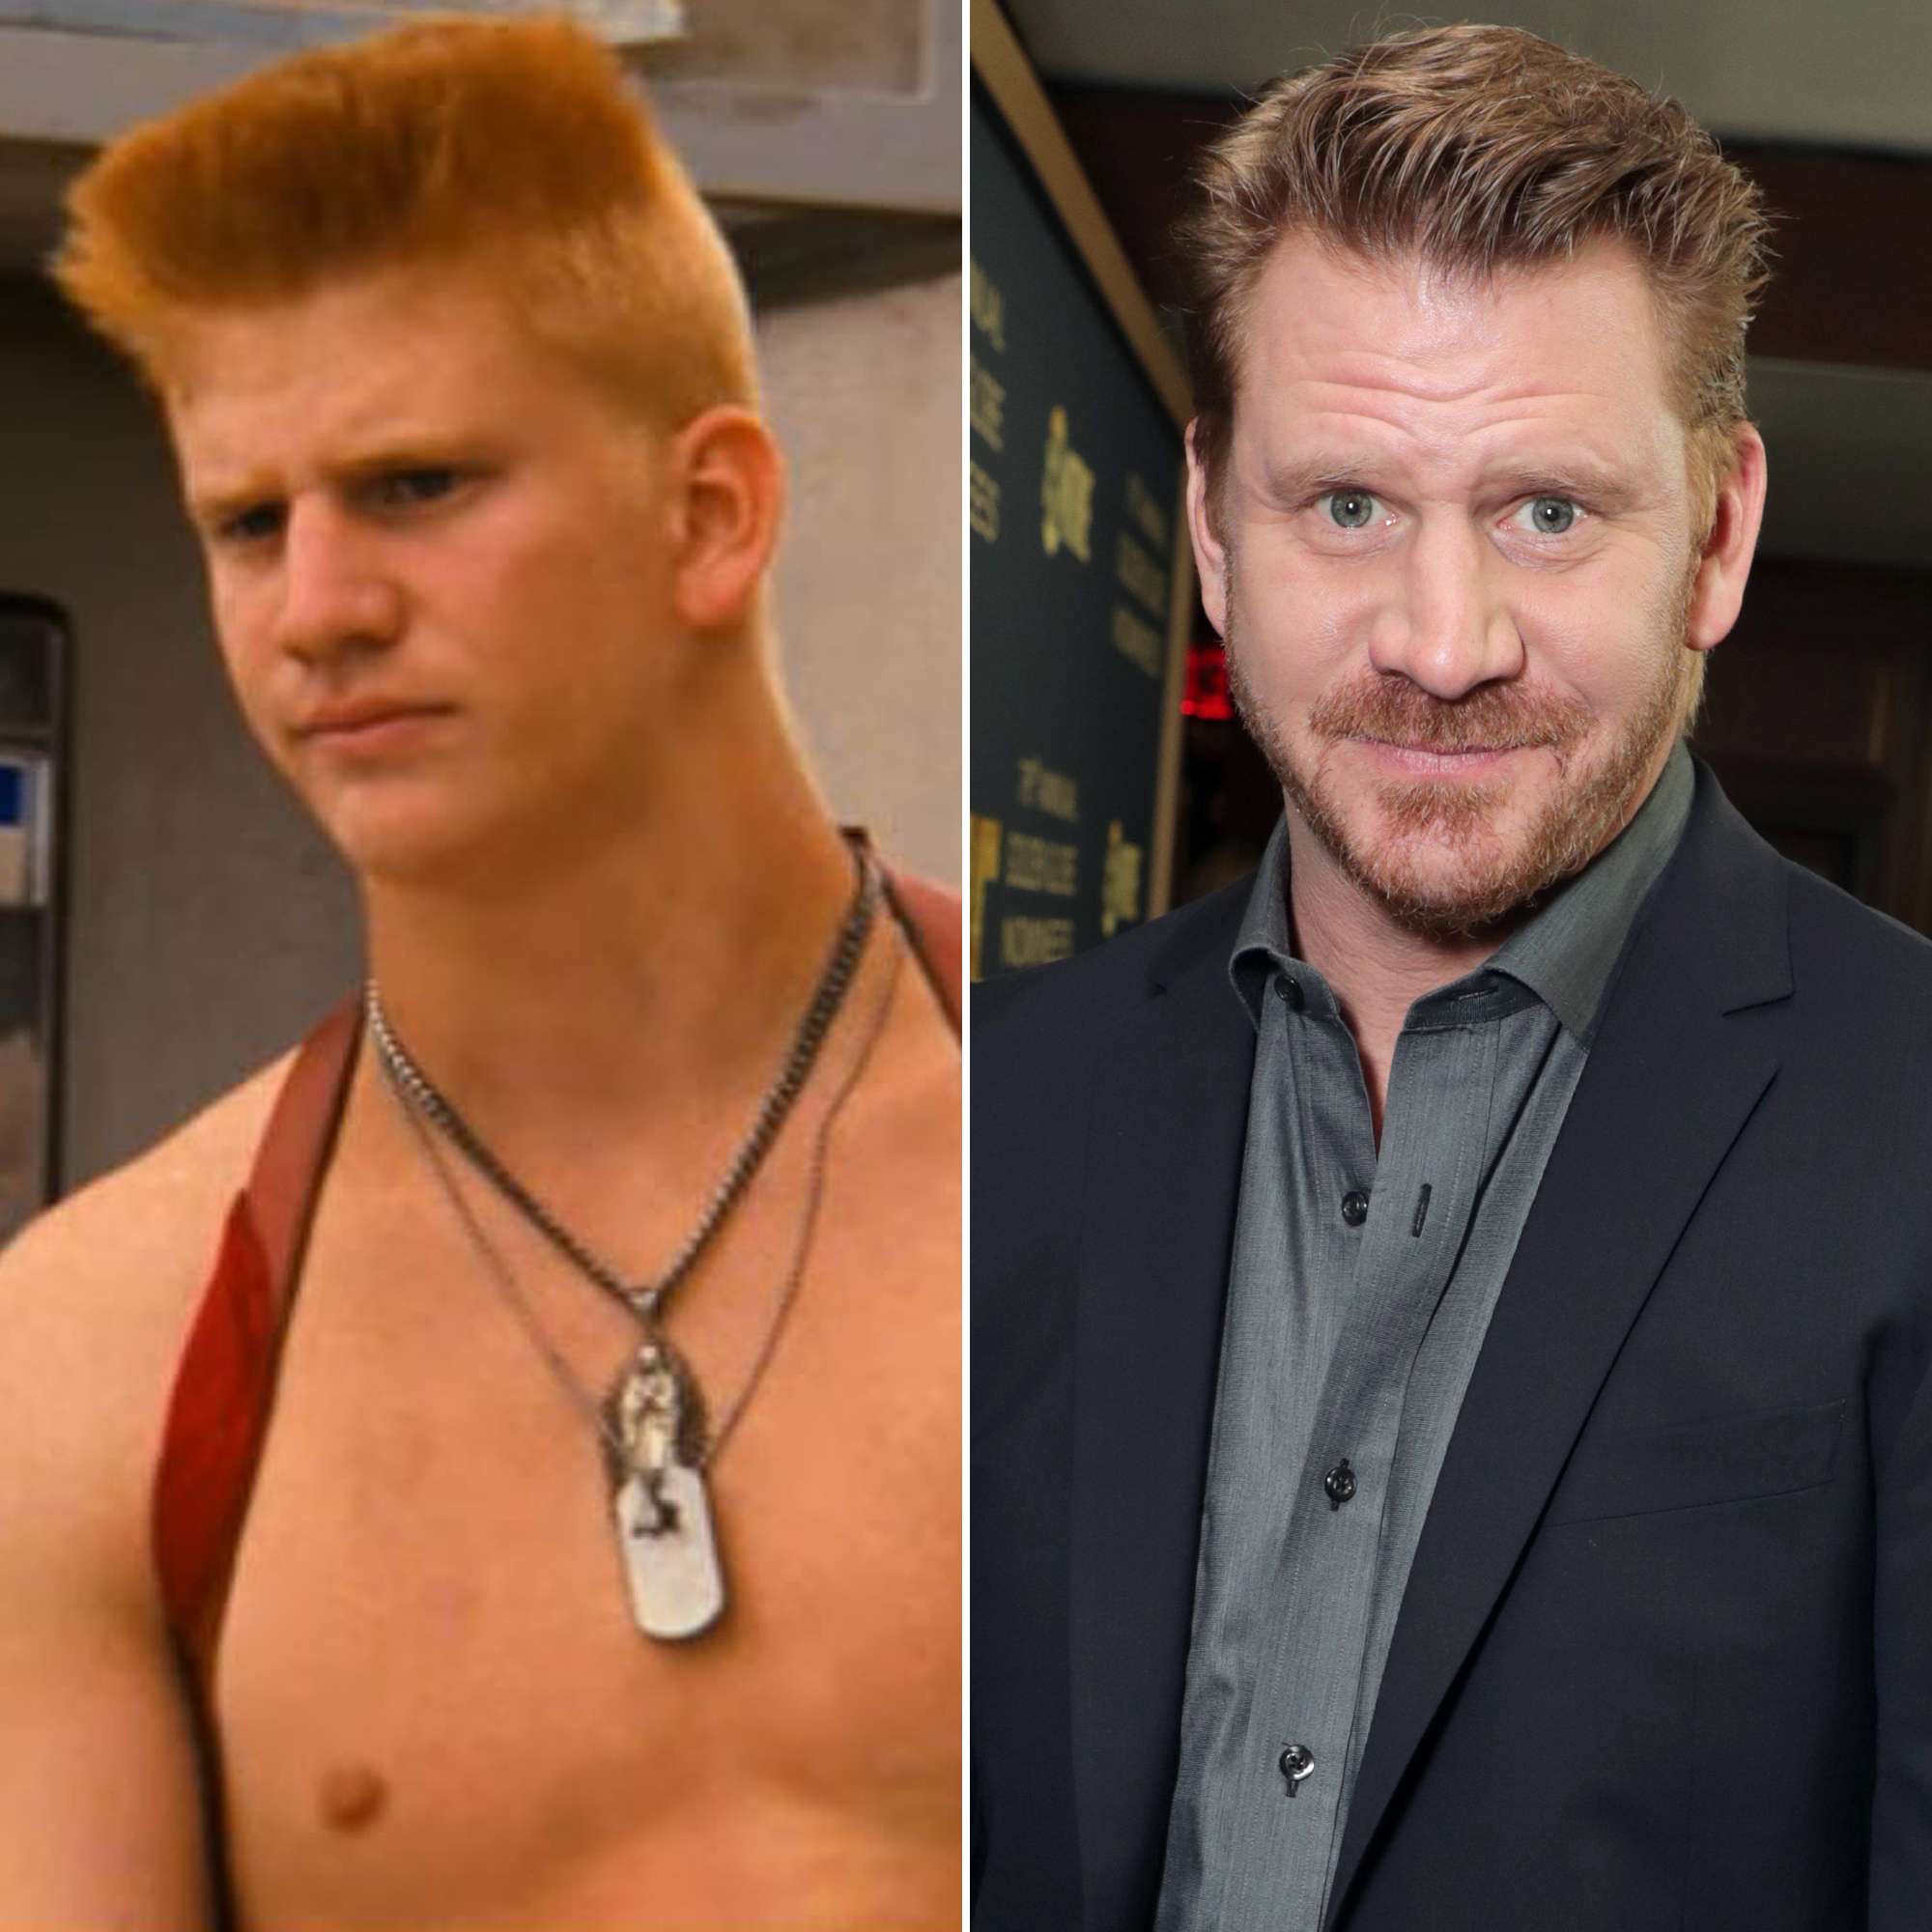 https://www.usmagazine.com/wp-content/uploads/2021/10/Romeo-and-Juliet-Cast-Where-Are-They-Now-Dash-Mihok.jpg?quality=86&strip=all